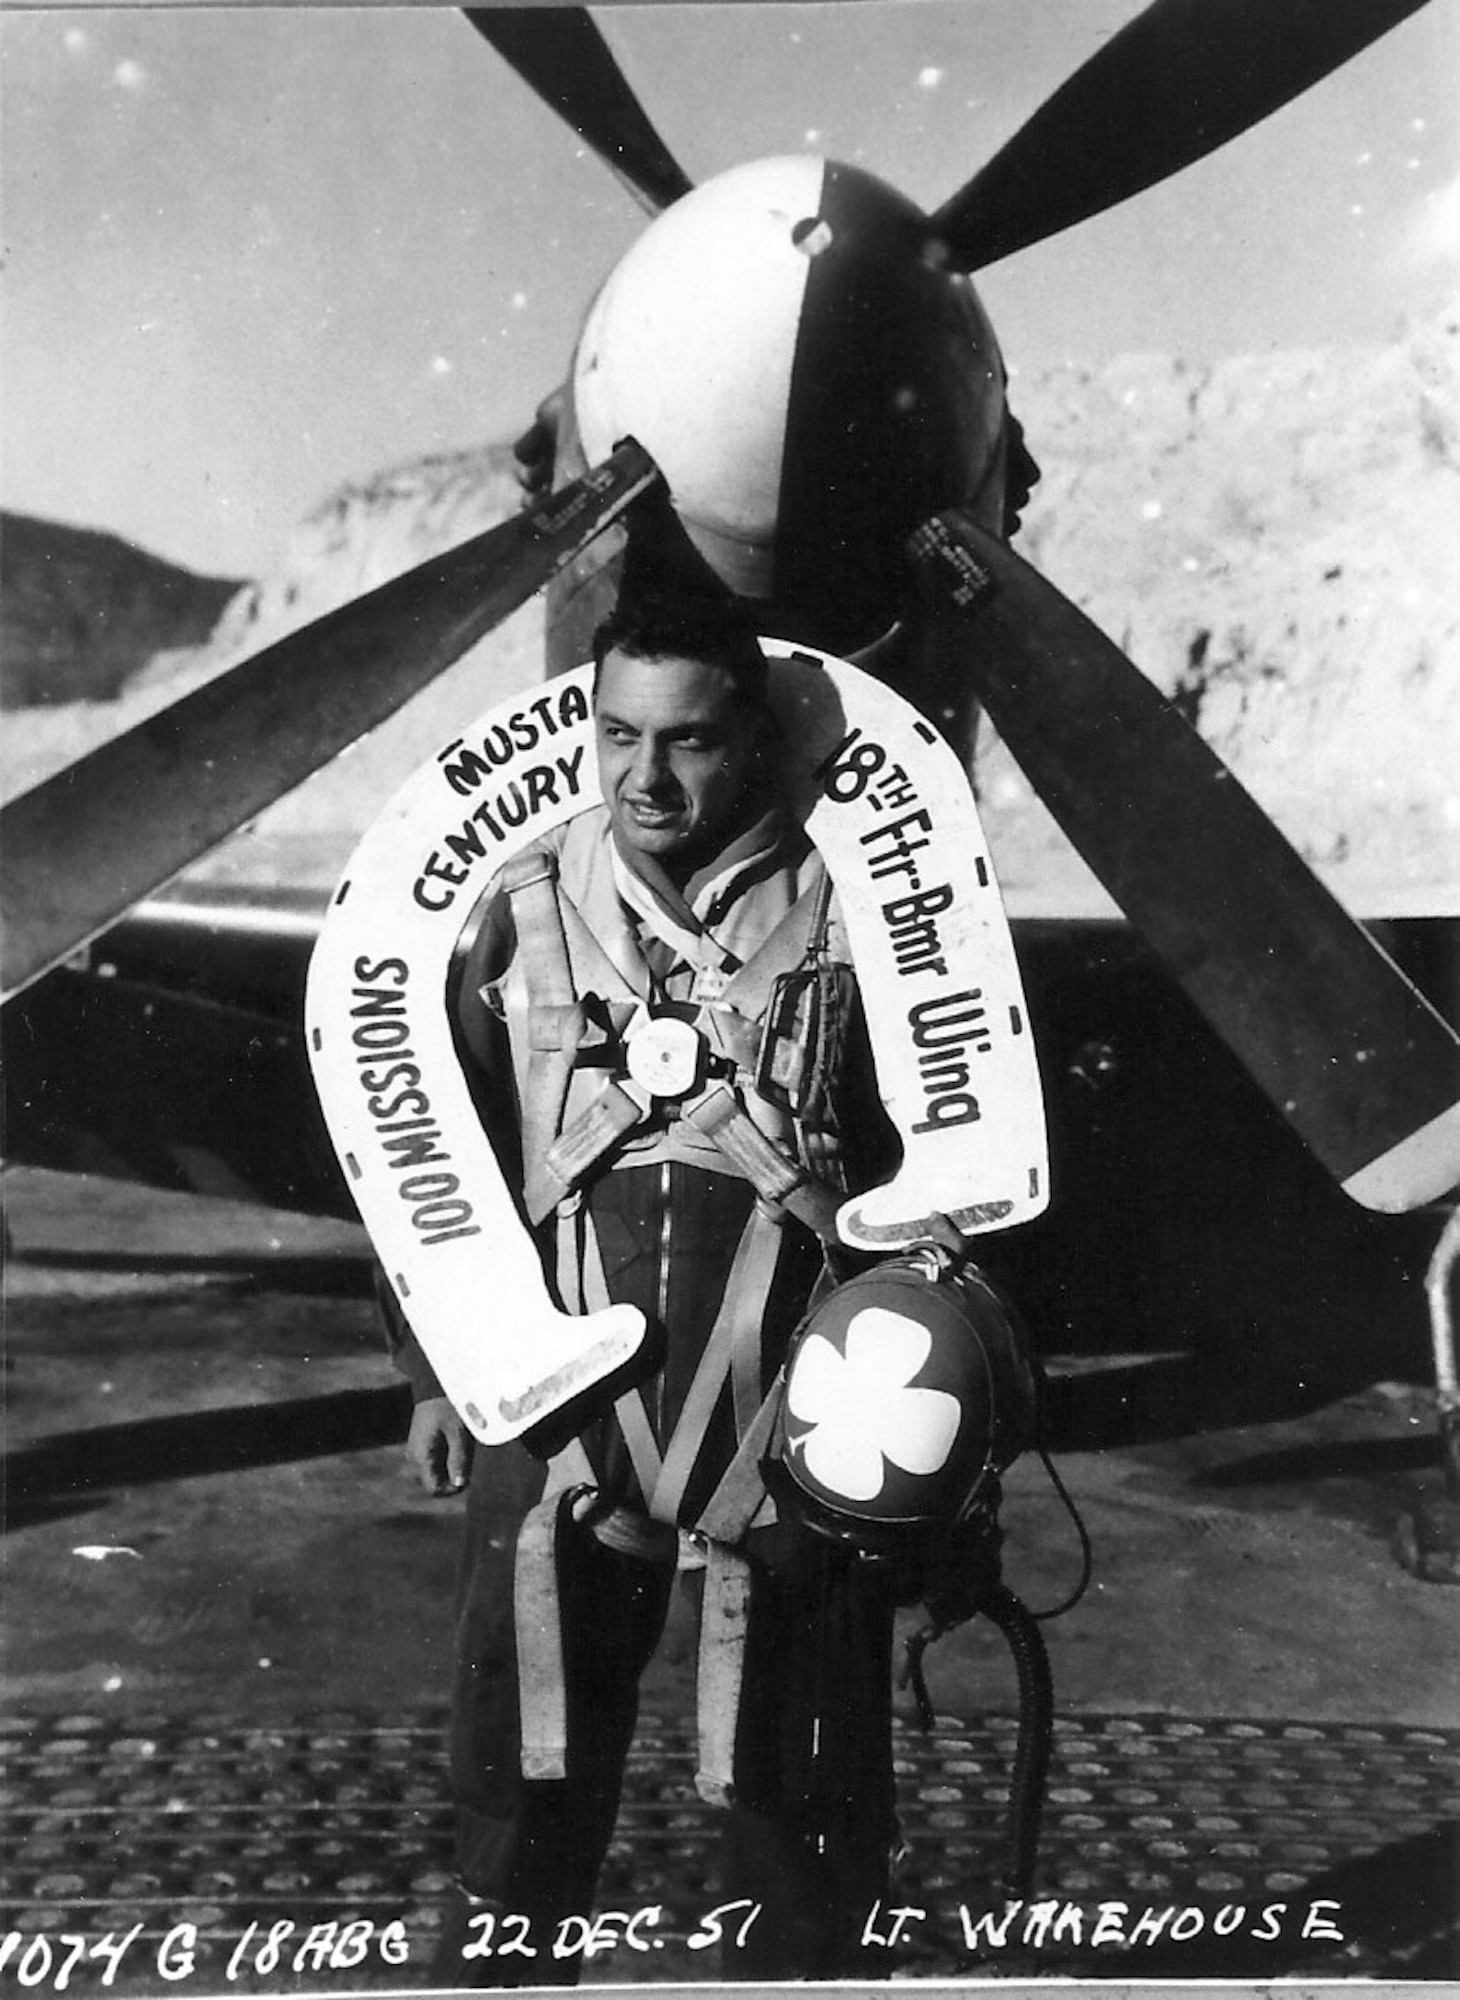 Ernie poses with his “lucky horseshoe” following his 100th mission in Korea.  Helmet is blue with white four-leaf clover.